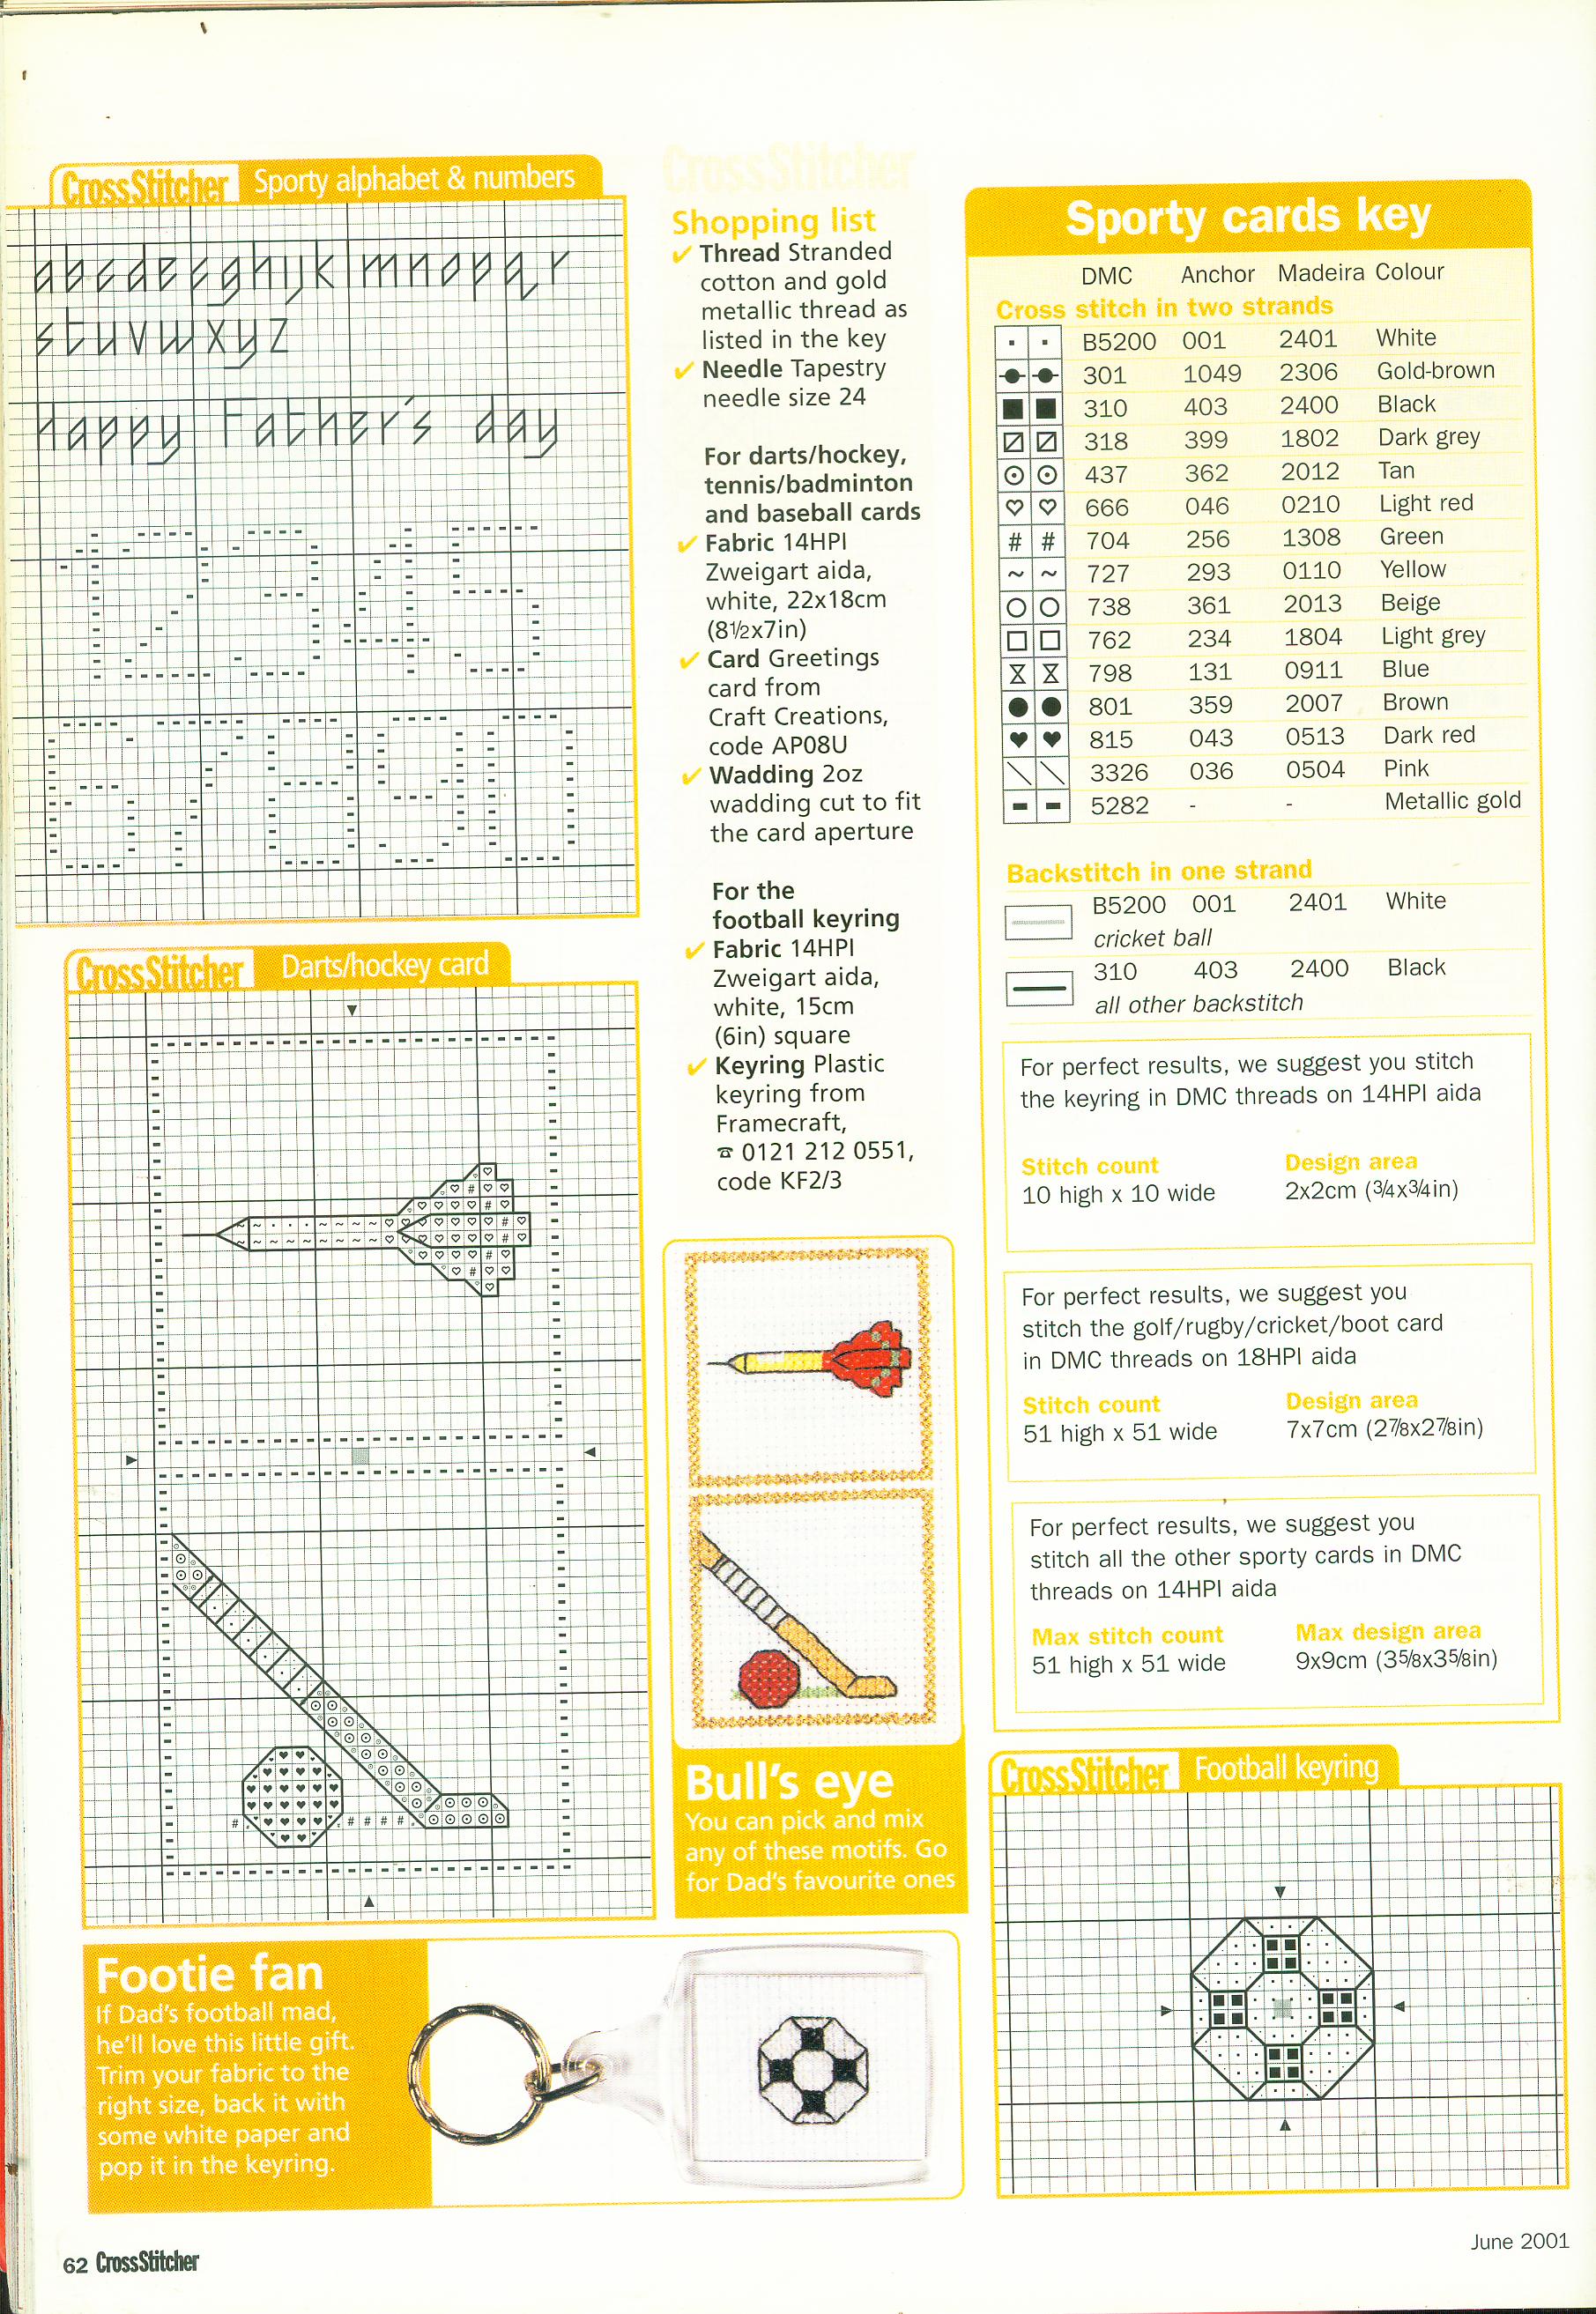 Father’ s Day cards cross stitch pattern (5)